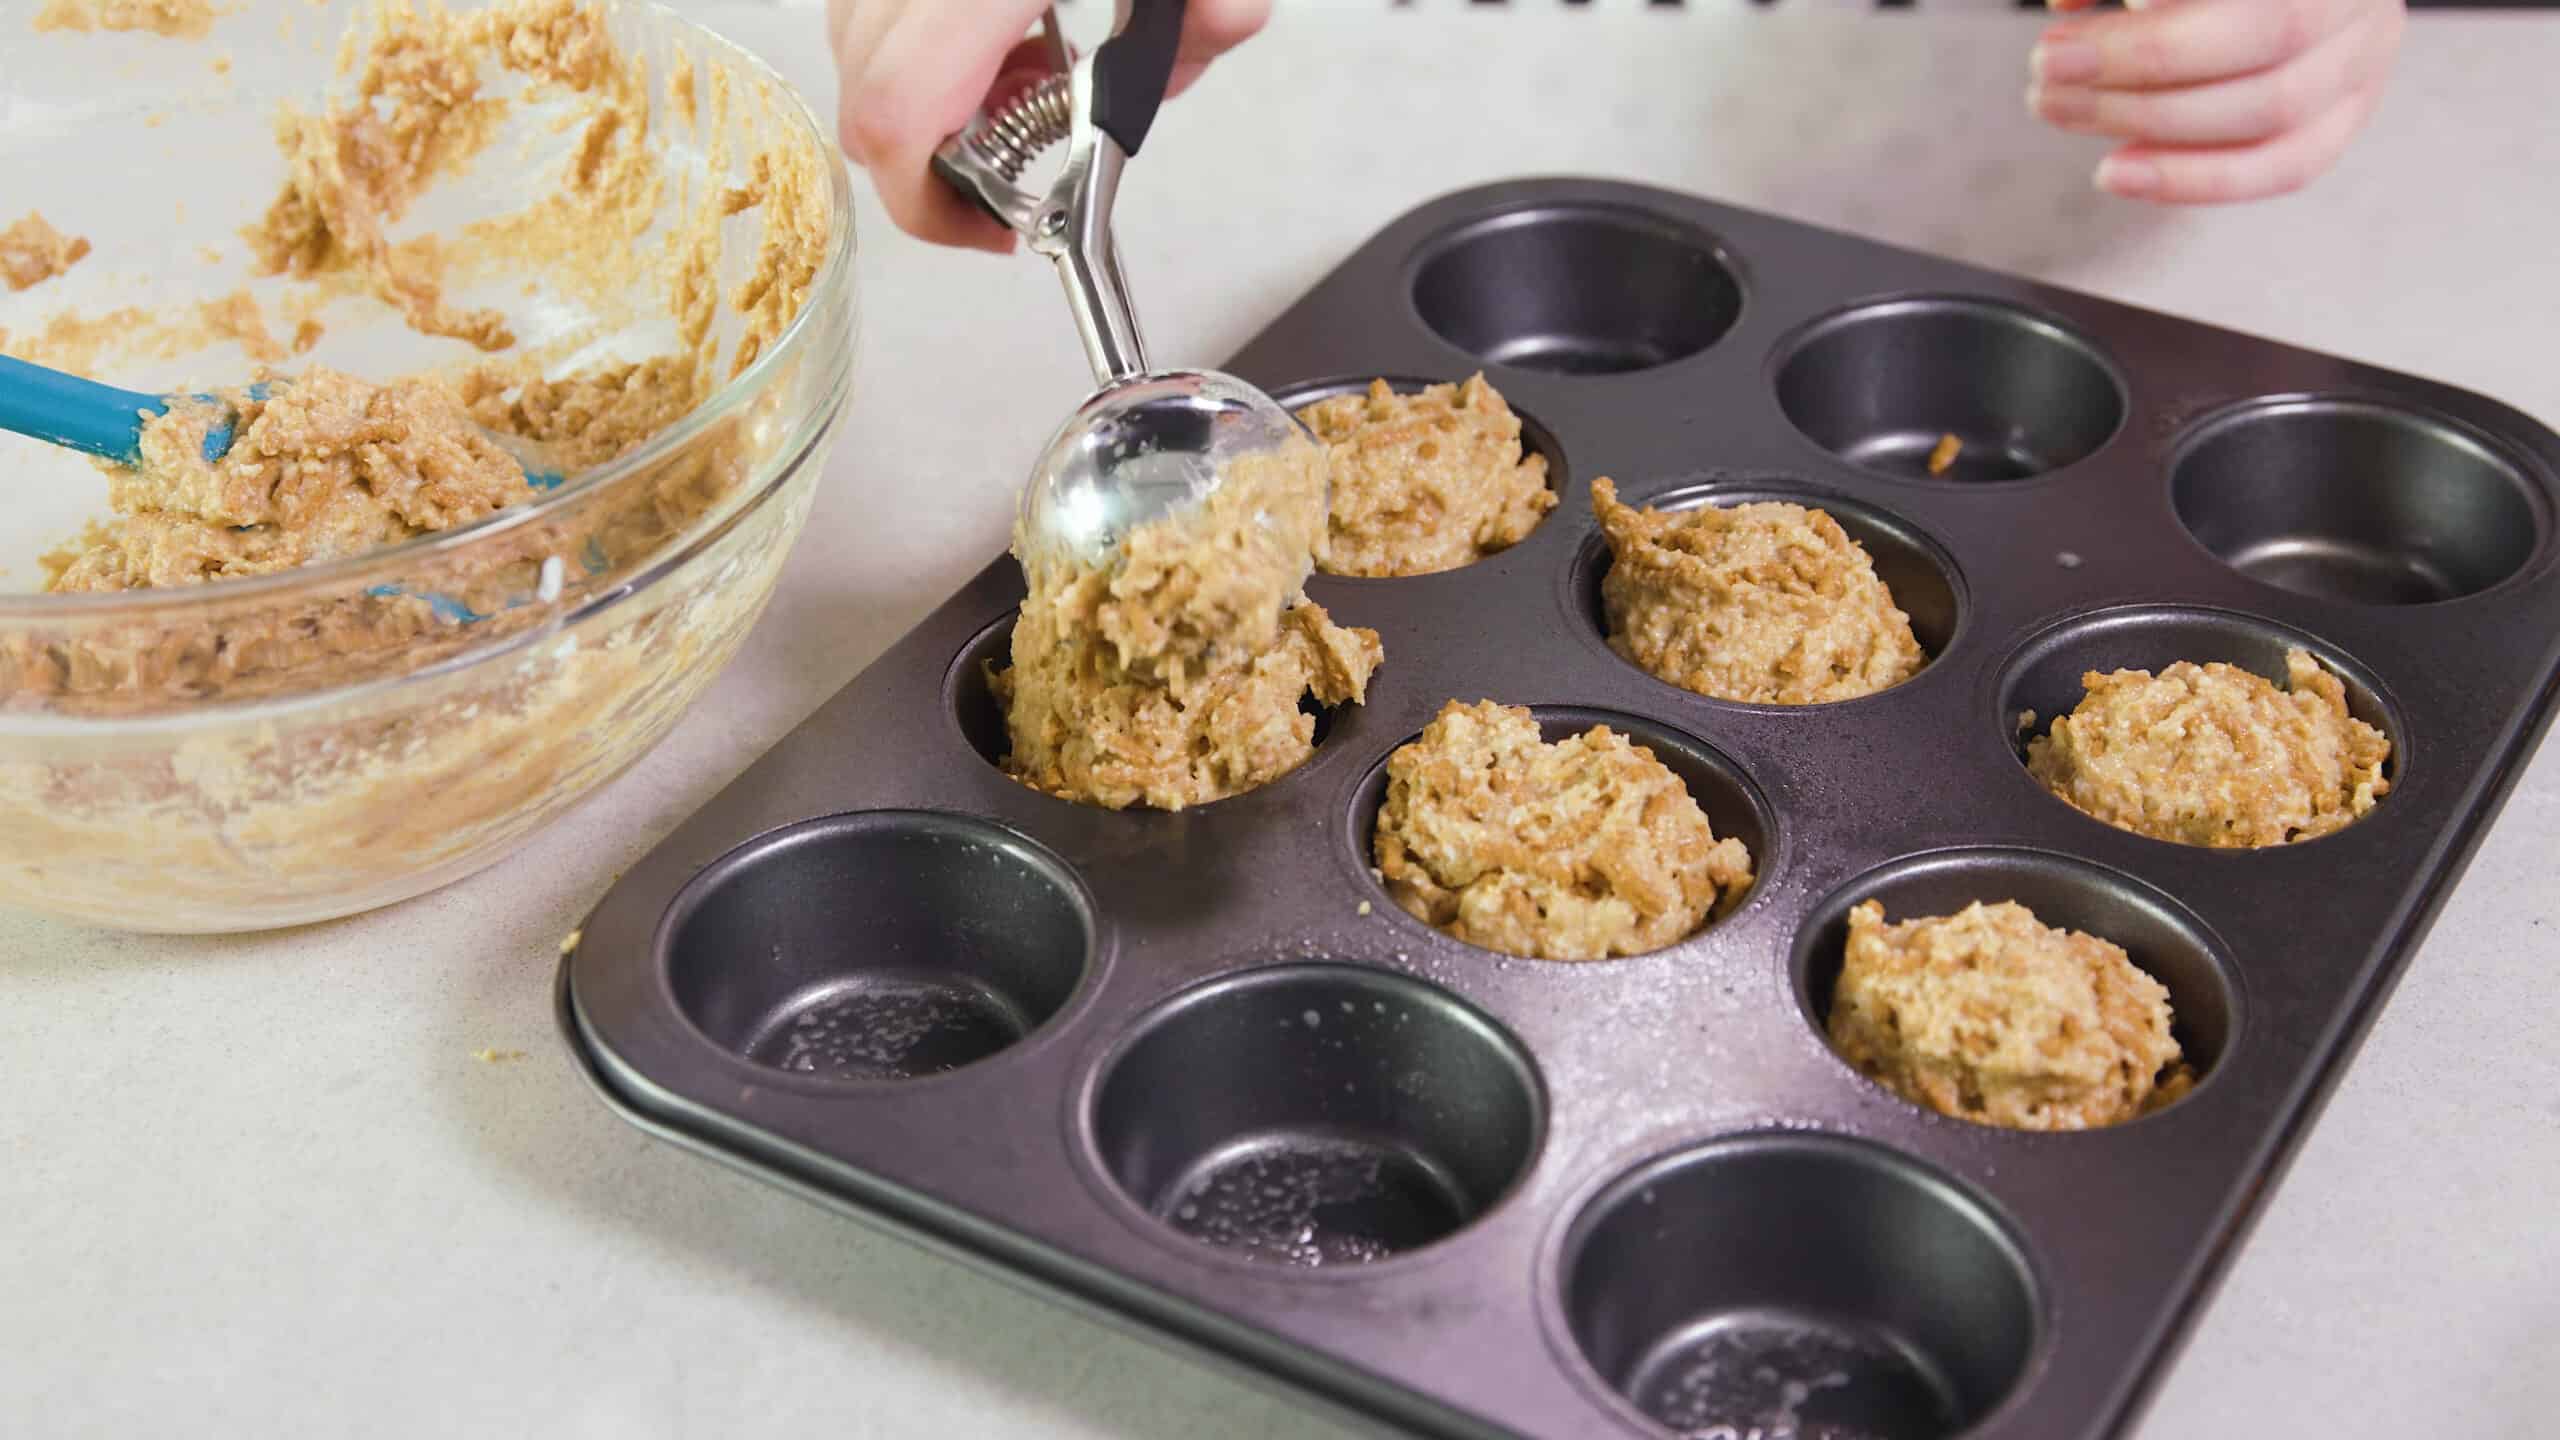 Angled view of greased metal muffin tin being filled with scoops of bran muffin mix using a metal scooper.